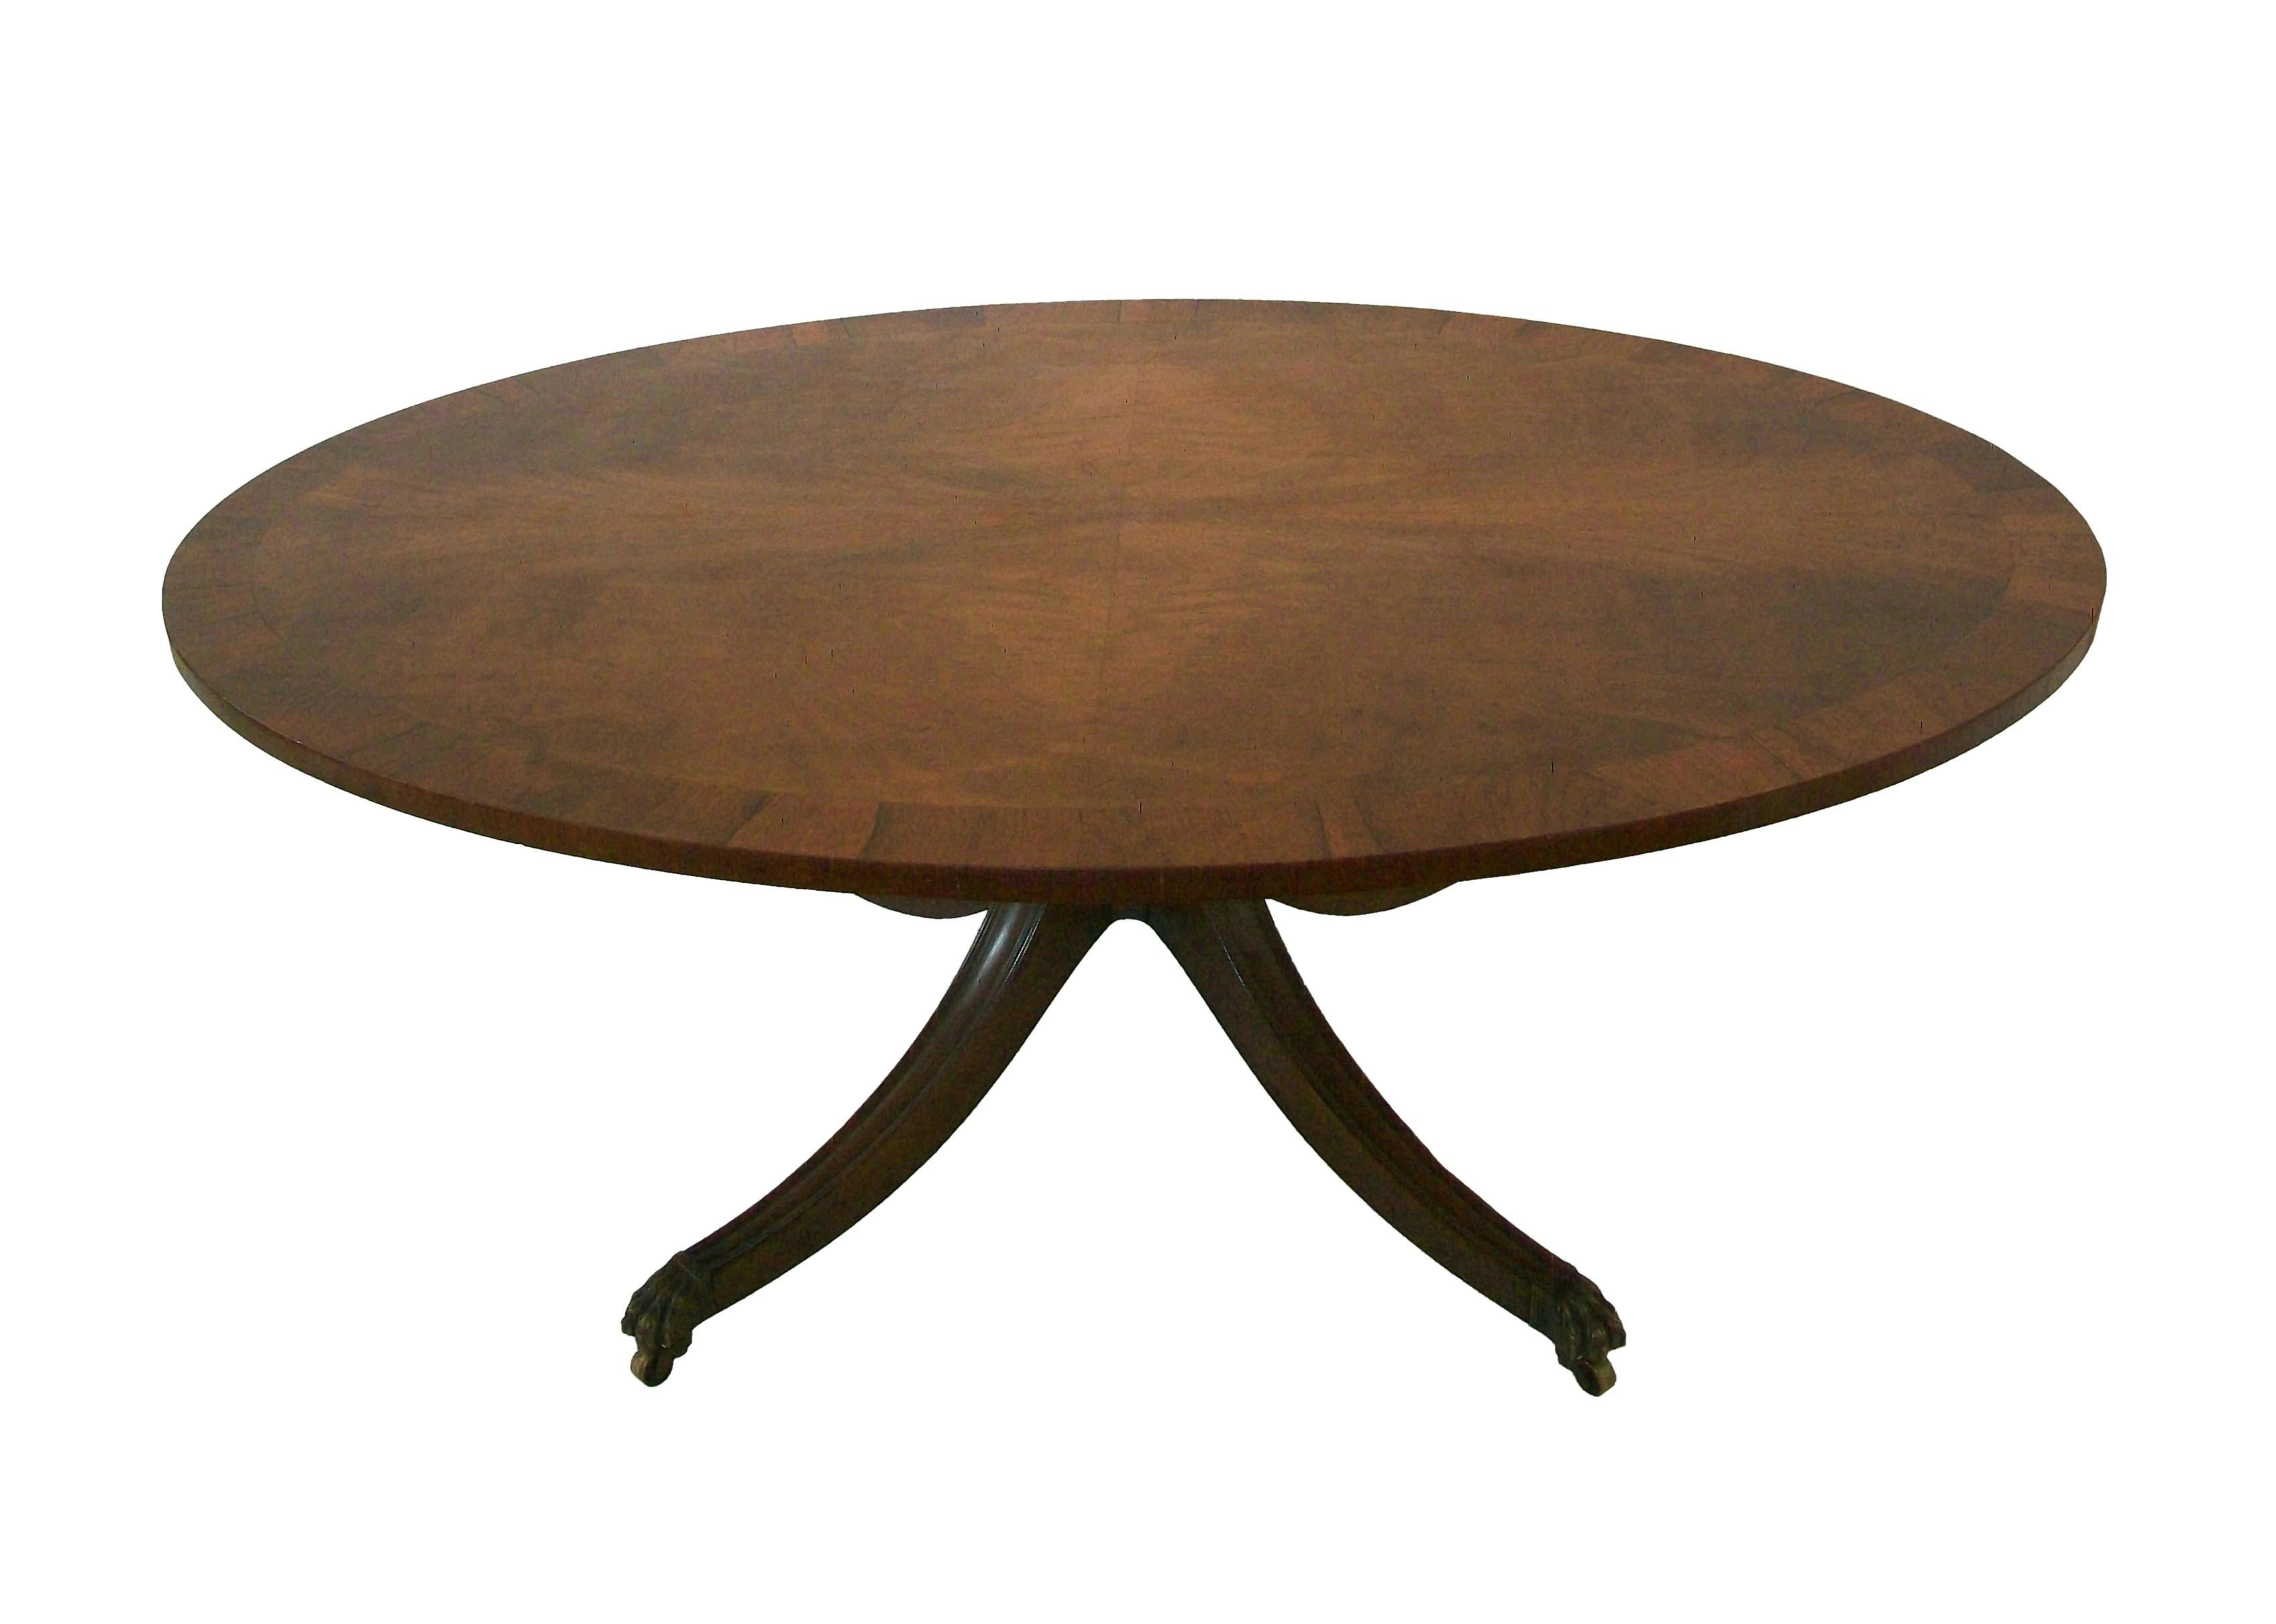 Fine Georgian (Regency Era) style banded oval coffee table - made for Eaton's College Street Gallery of Fine Furniture (Toronto 1930-1977) - exceptional bench made quality with warm vintage patina - featuring a flamed wood veneer to the top with a 2